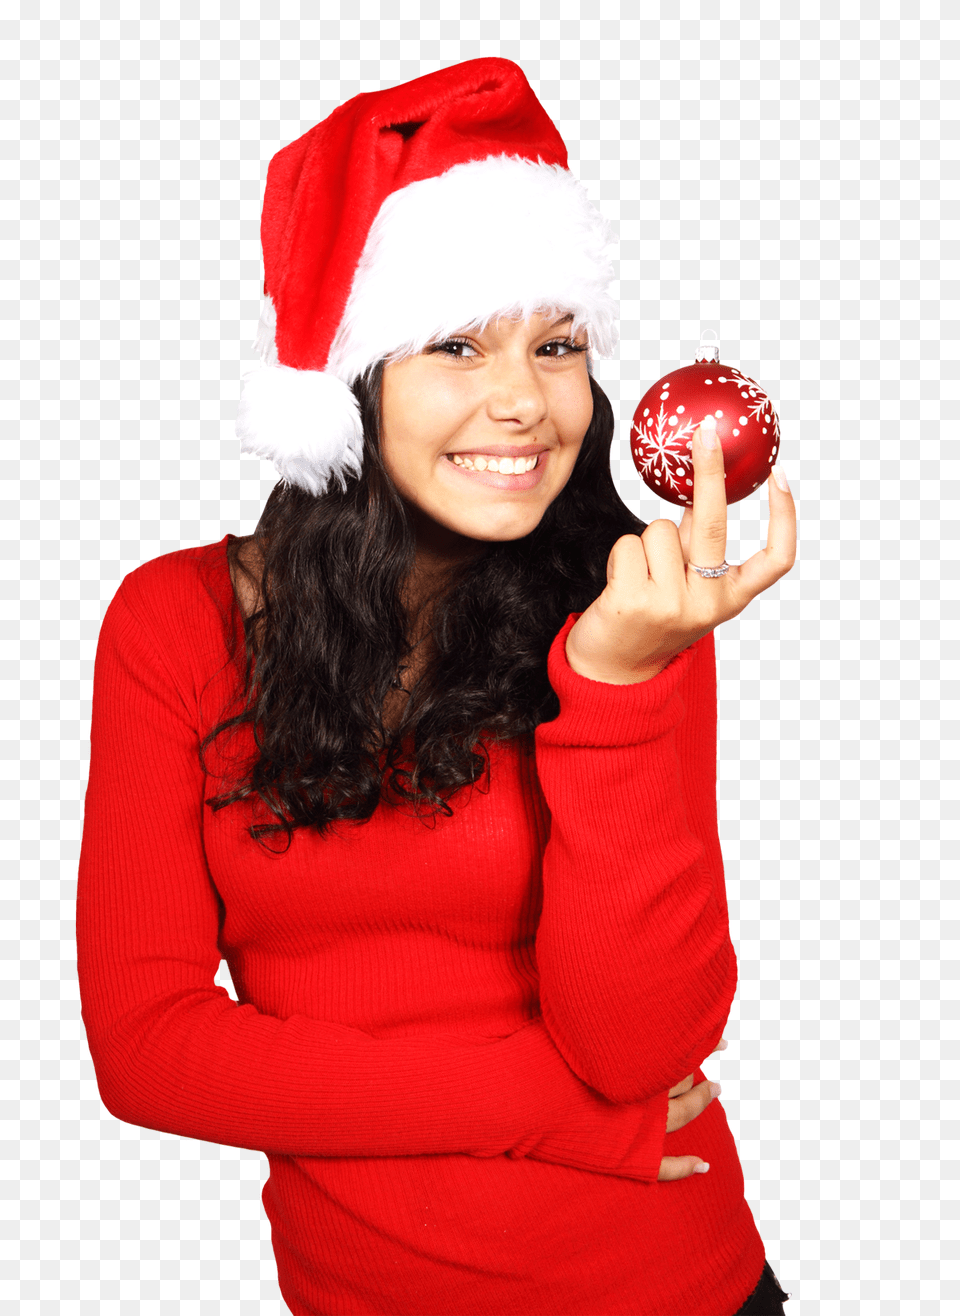 Pngpix Com Attractive Young Woman Holding Christmas Ball Image, Hat, Photography, Head, Portrait Png